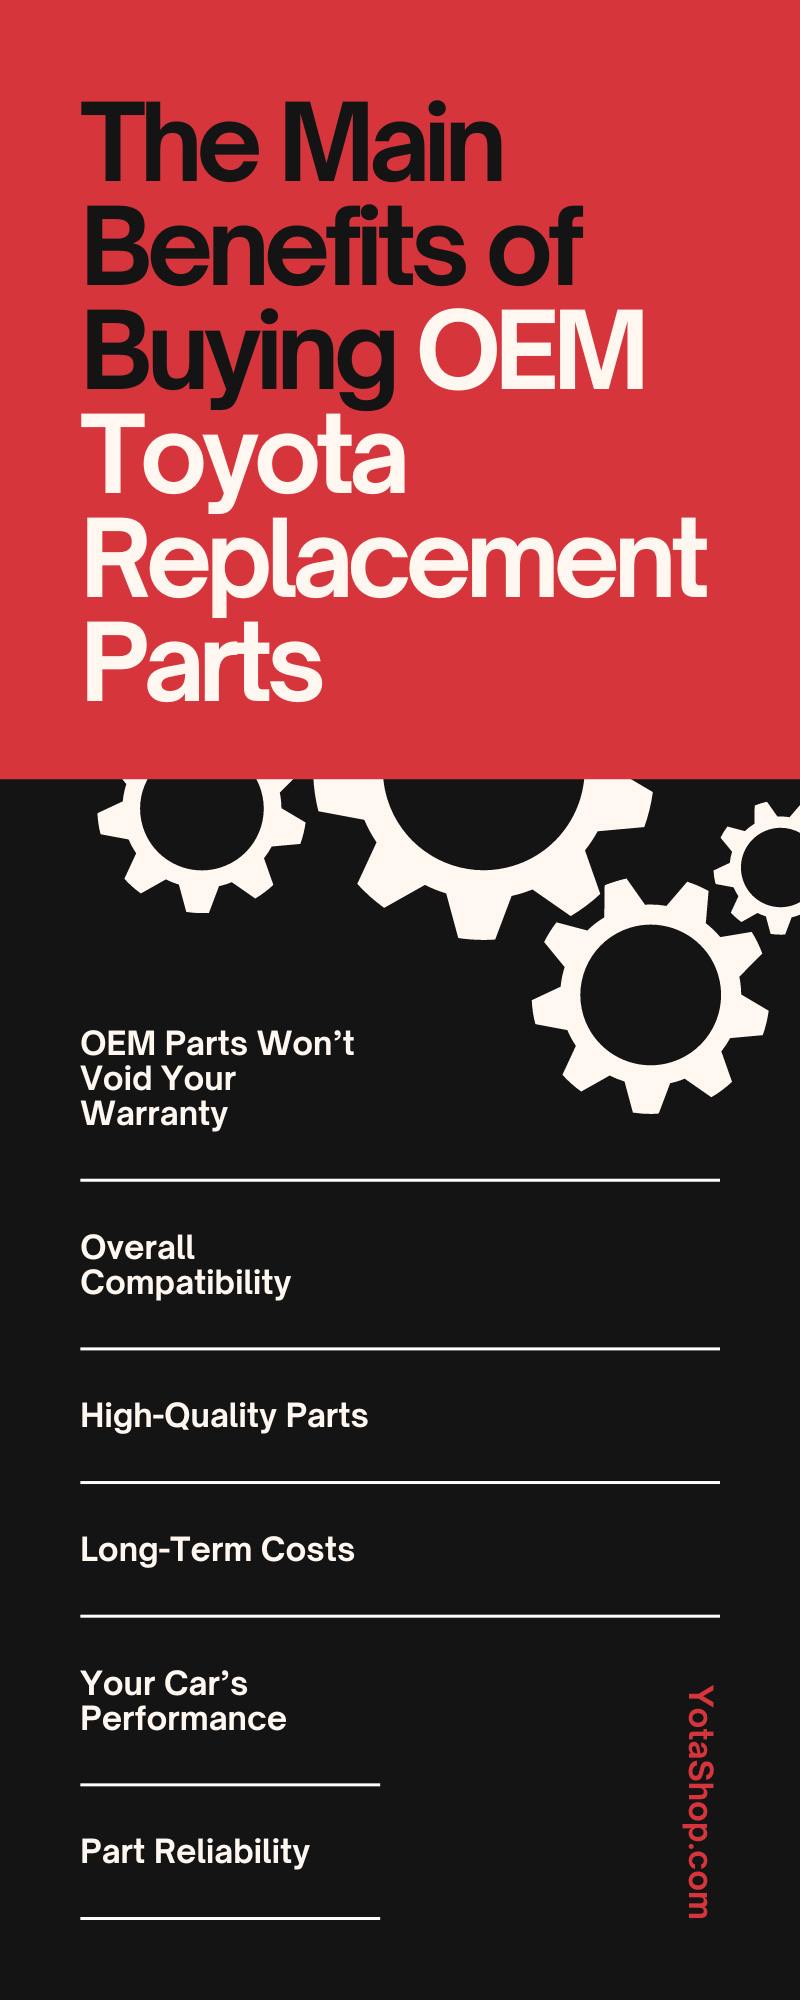 The Main Benefits of Buying OEM Toyota Replacement Parts